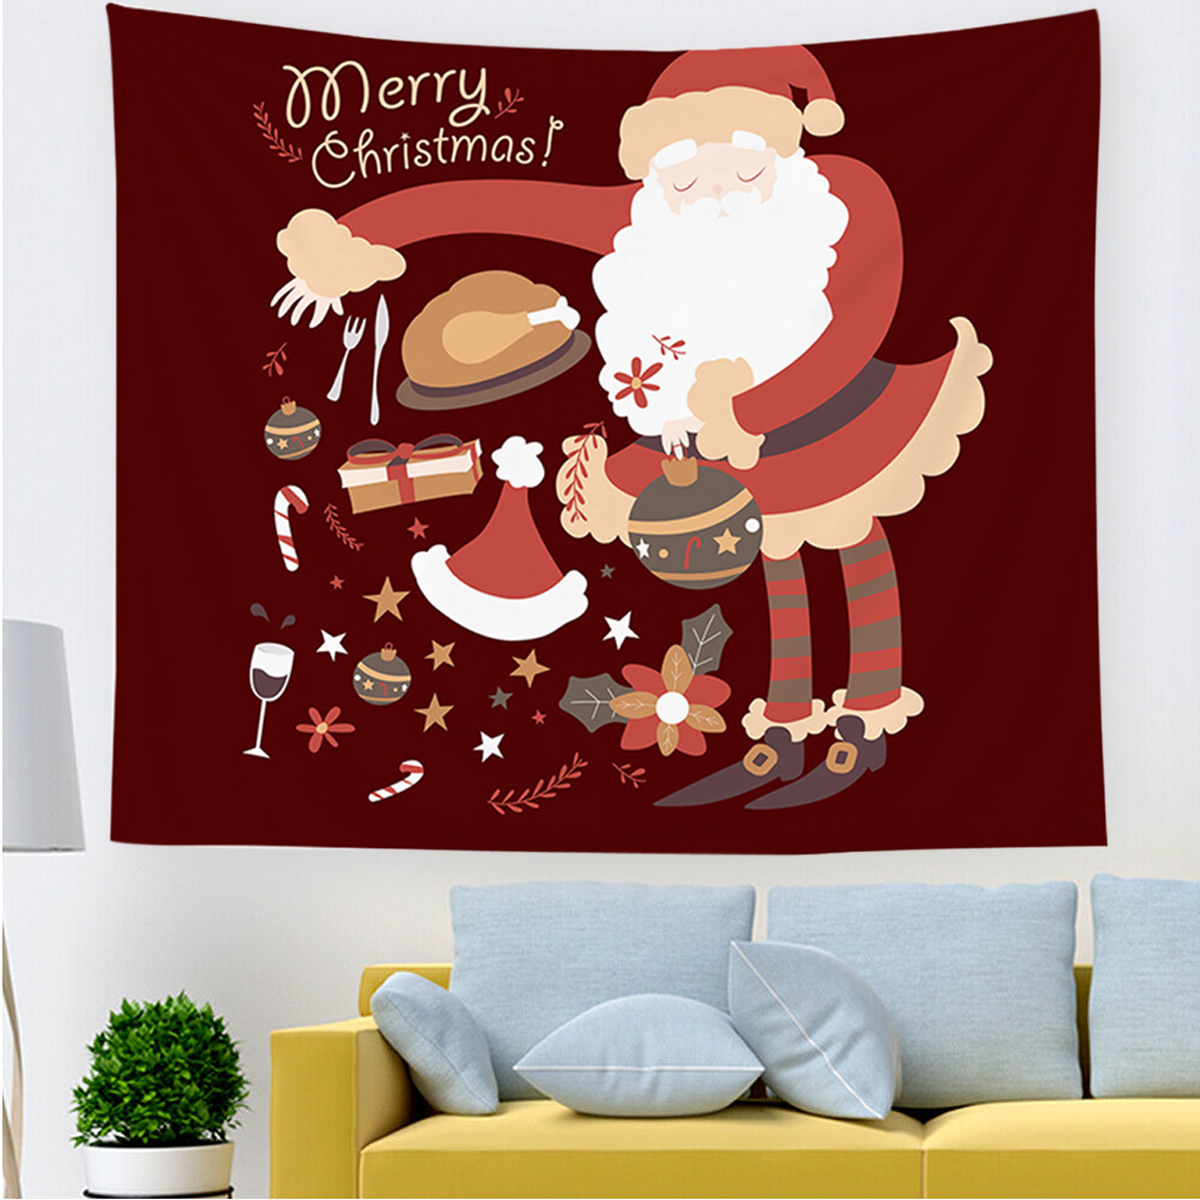 Christmas-Hanging-Cloth-Custom-Red-Santa-Claus-Bedside-Photography-Background-Cloth-Wall-Bedside-Dec-1749899-1